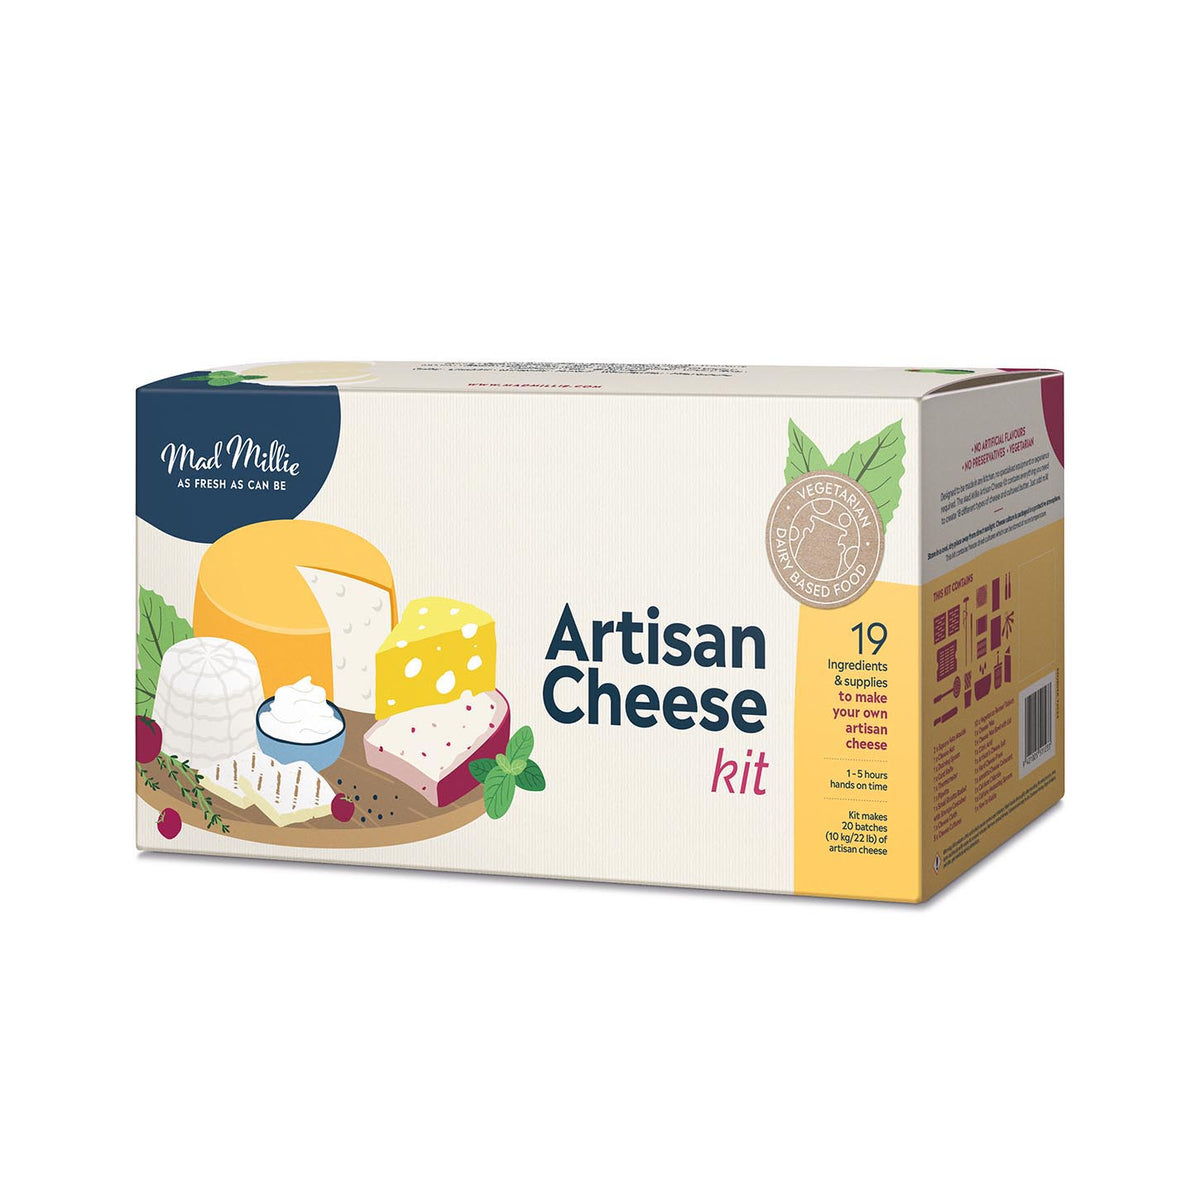 Mad Millie Artisan Cheese Kit - All Things Fermented | Home Brew Shop NZ | Supplies | Equipment